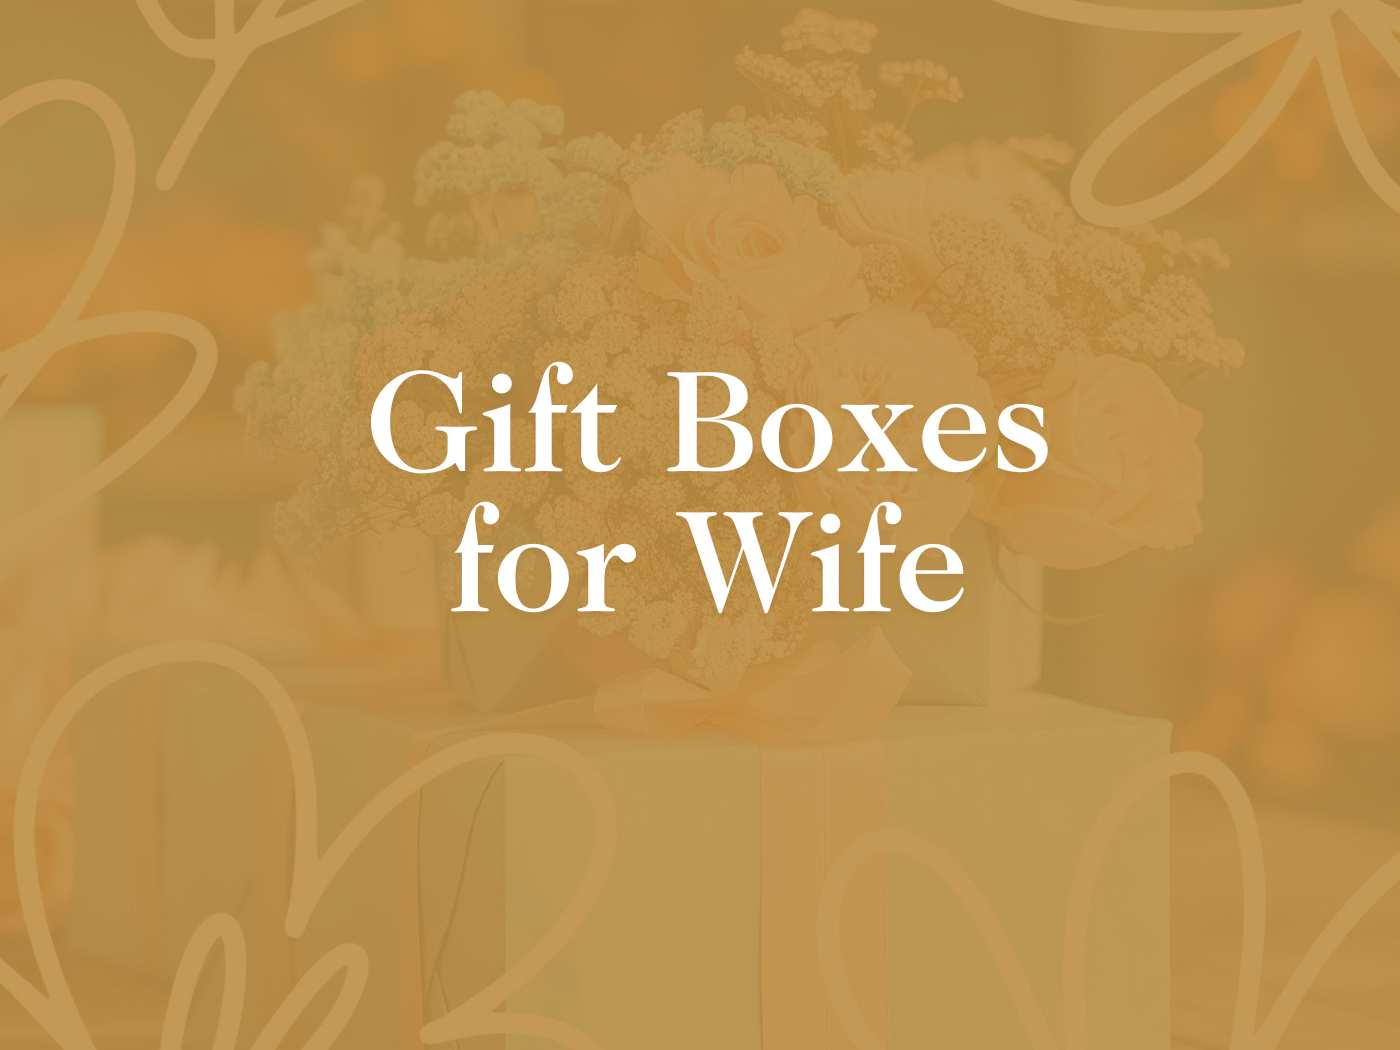 Text overlay that reads “Gift Boxes for Wife” against a yellow, mustard background. Gifts Boxes for Wife. Fabulous Flowers and Gifts.